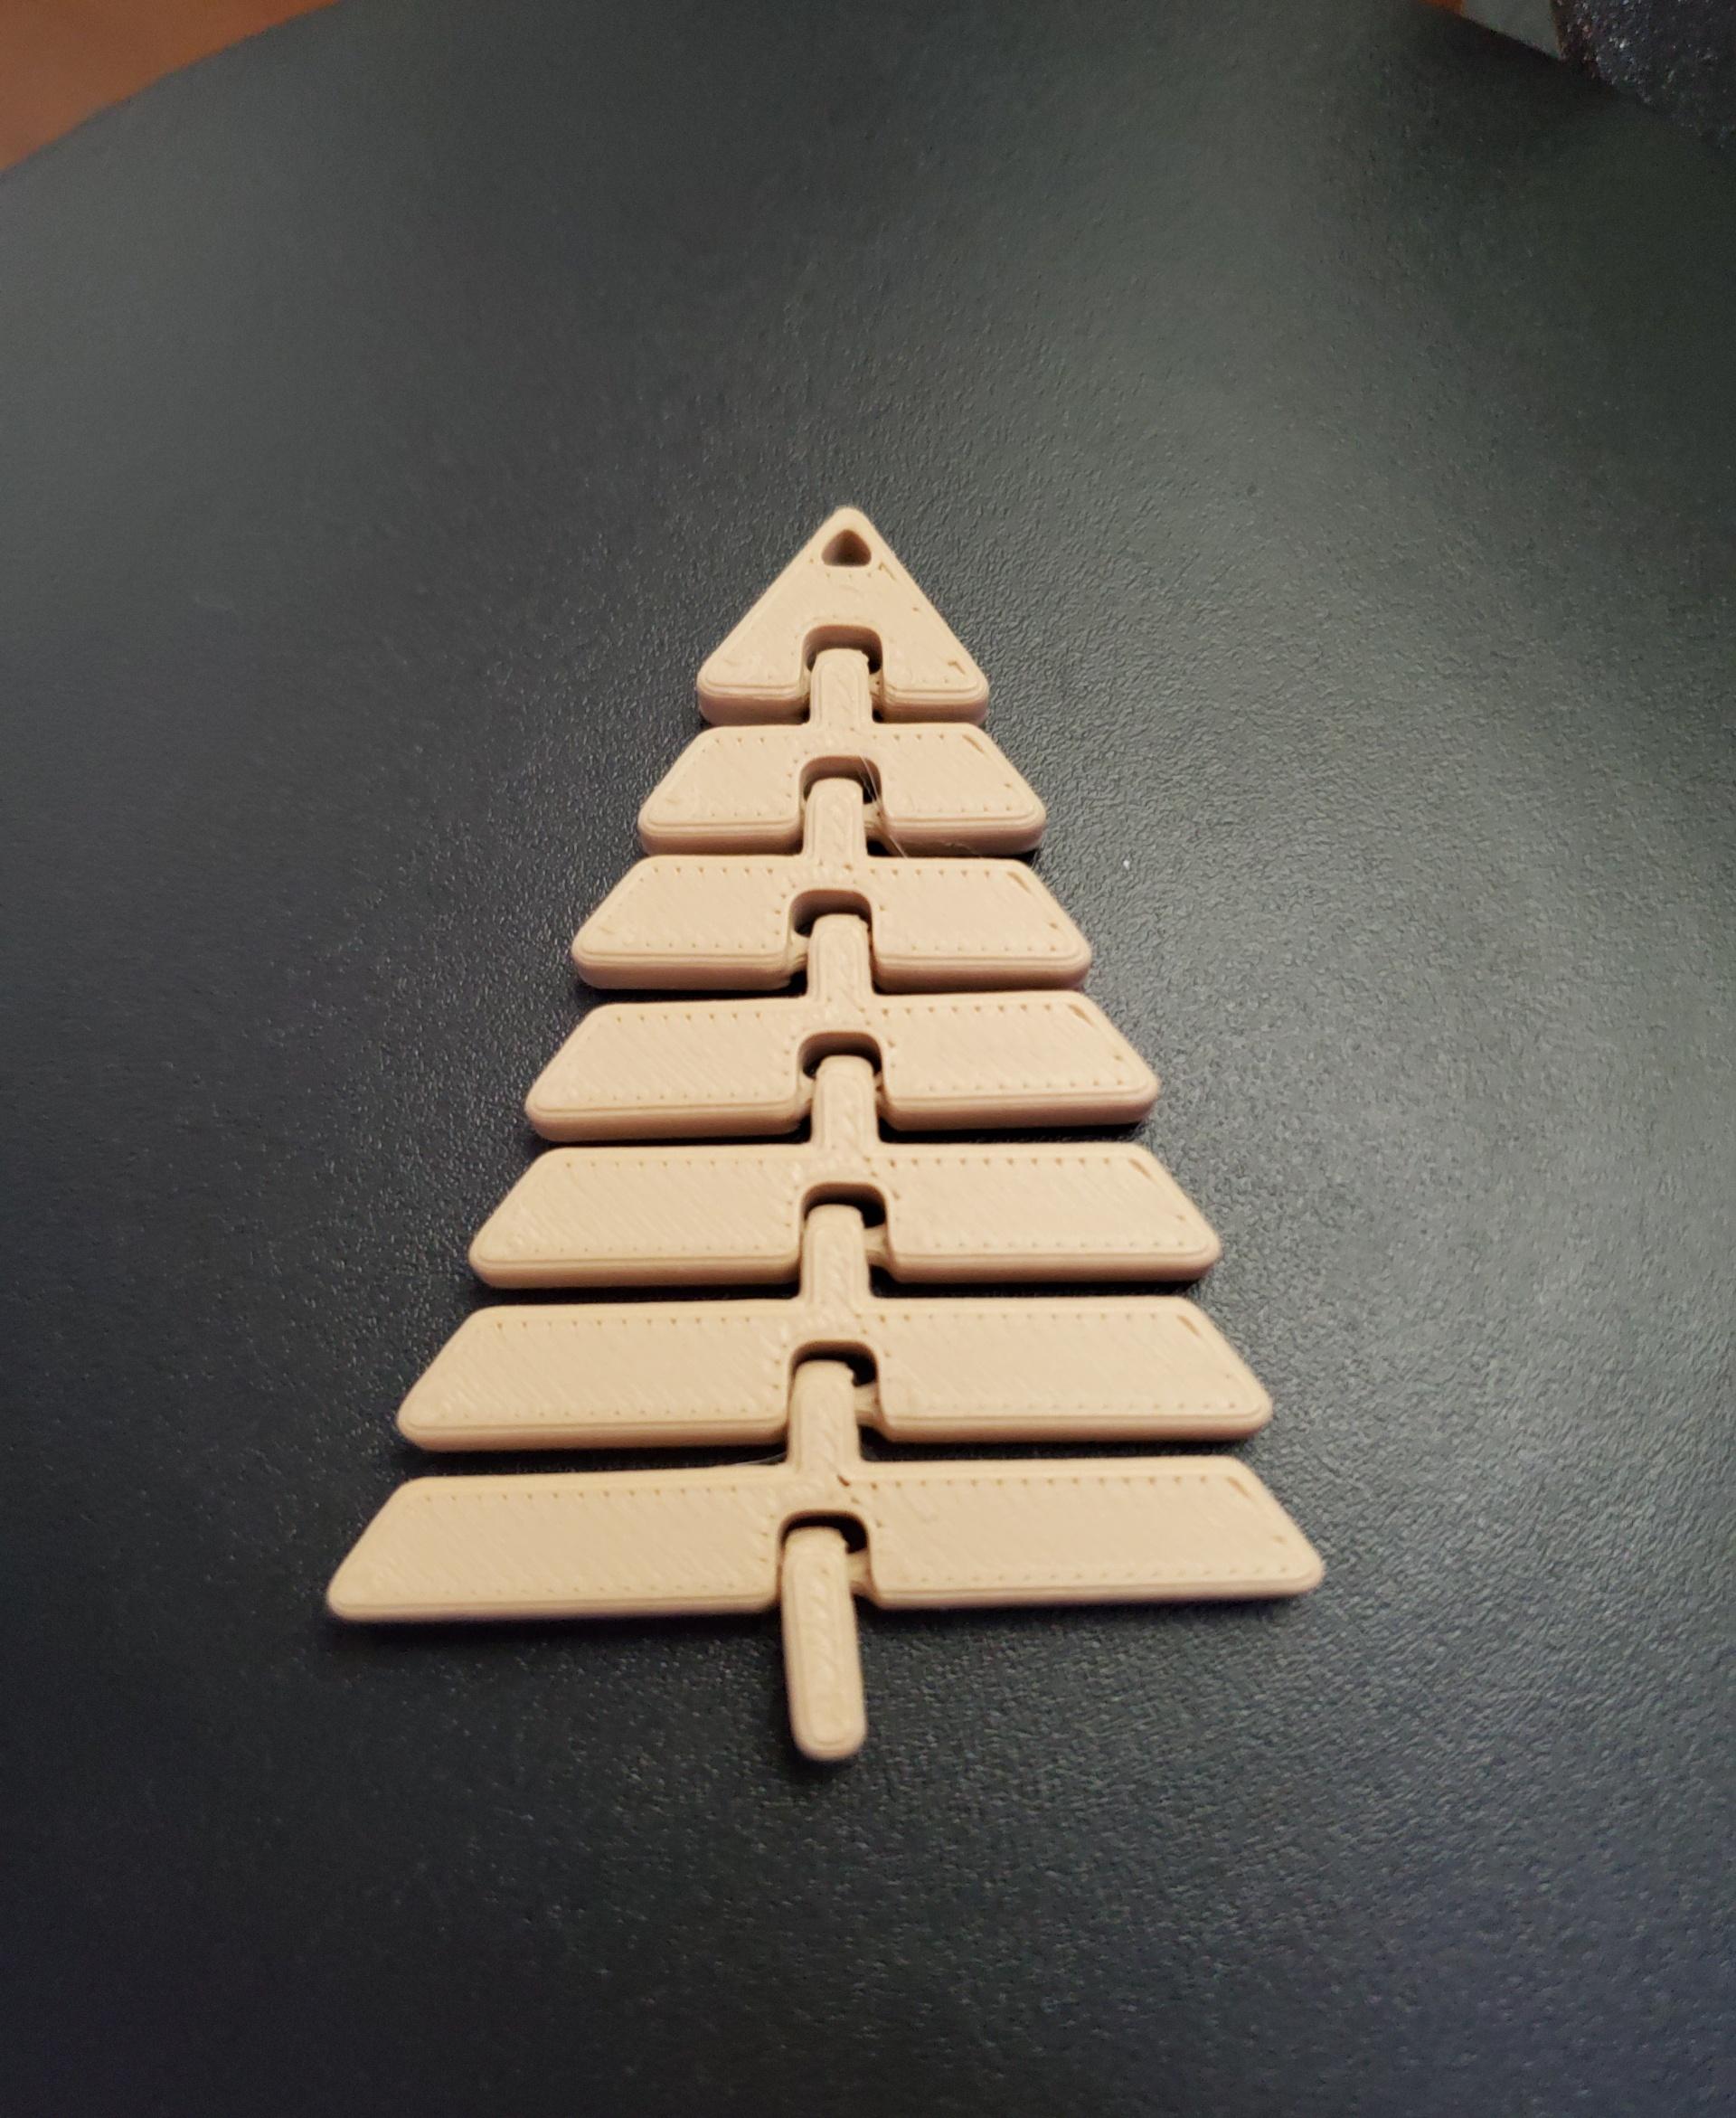 Articulated Christmas Tree Keychain - Print in place fidget toy - polyterra peanut - 3d model